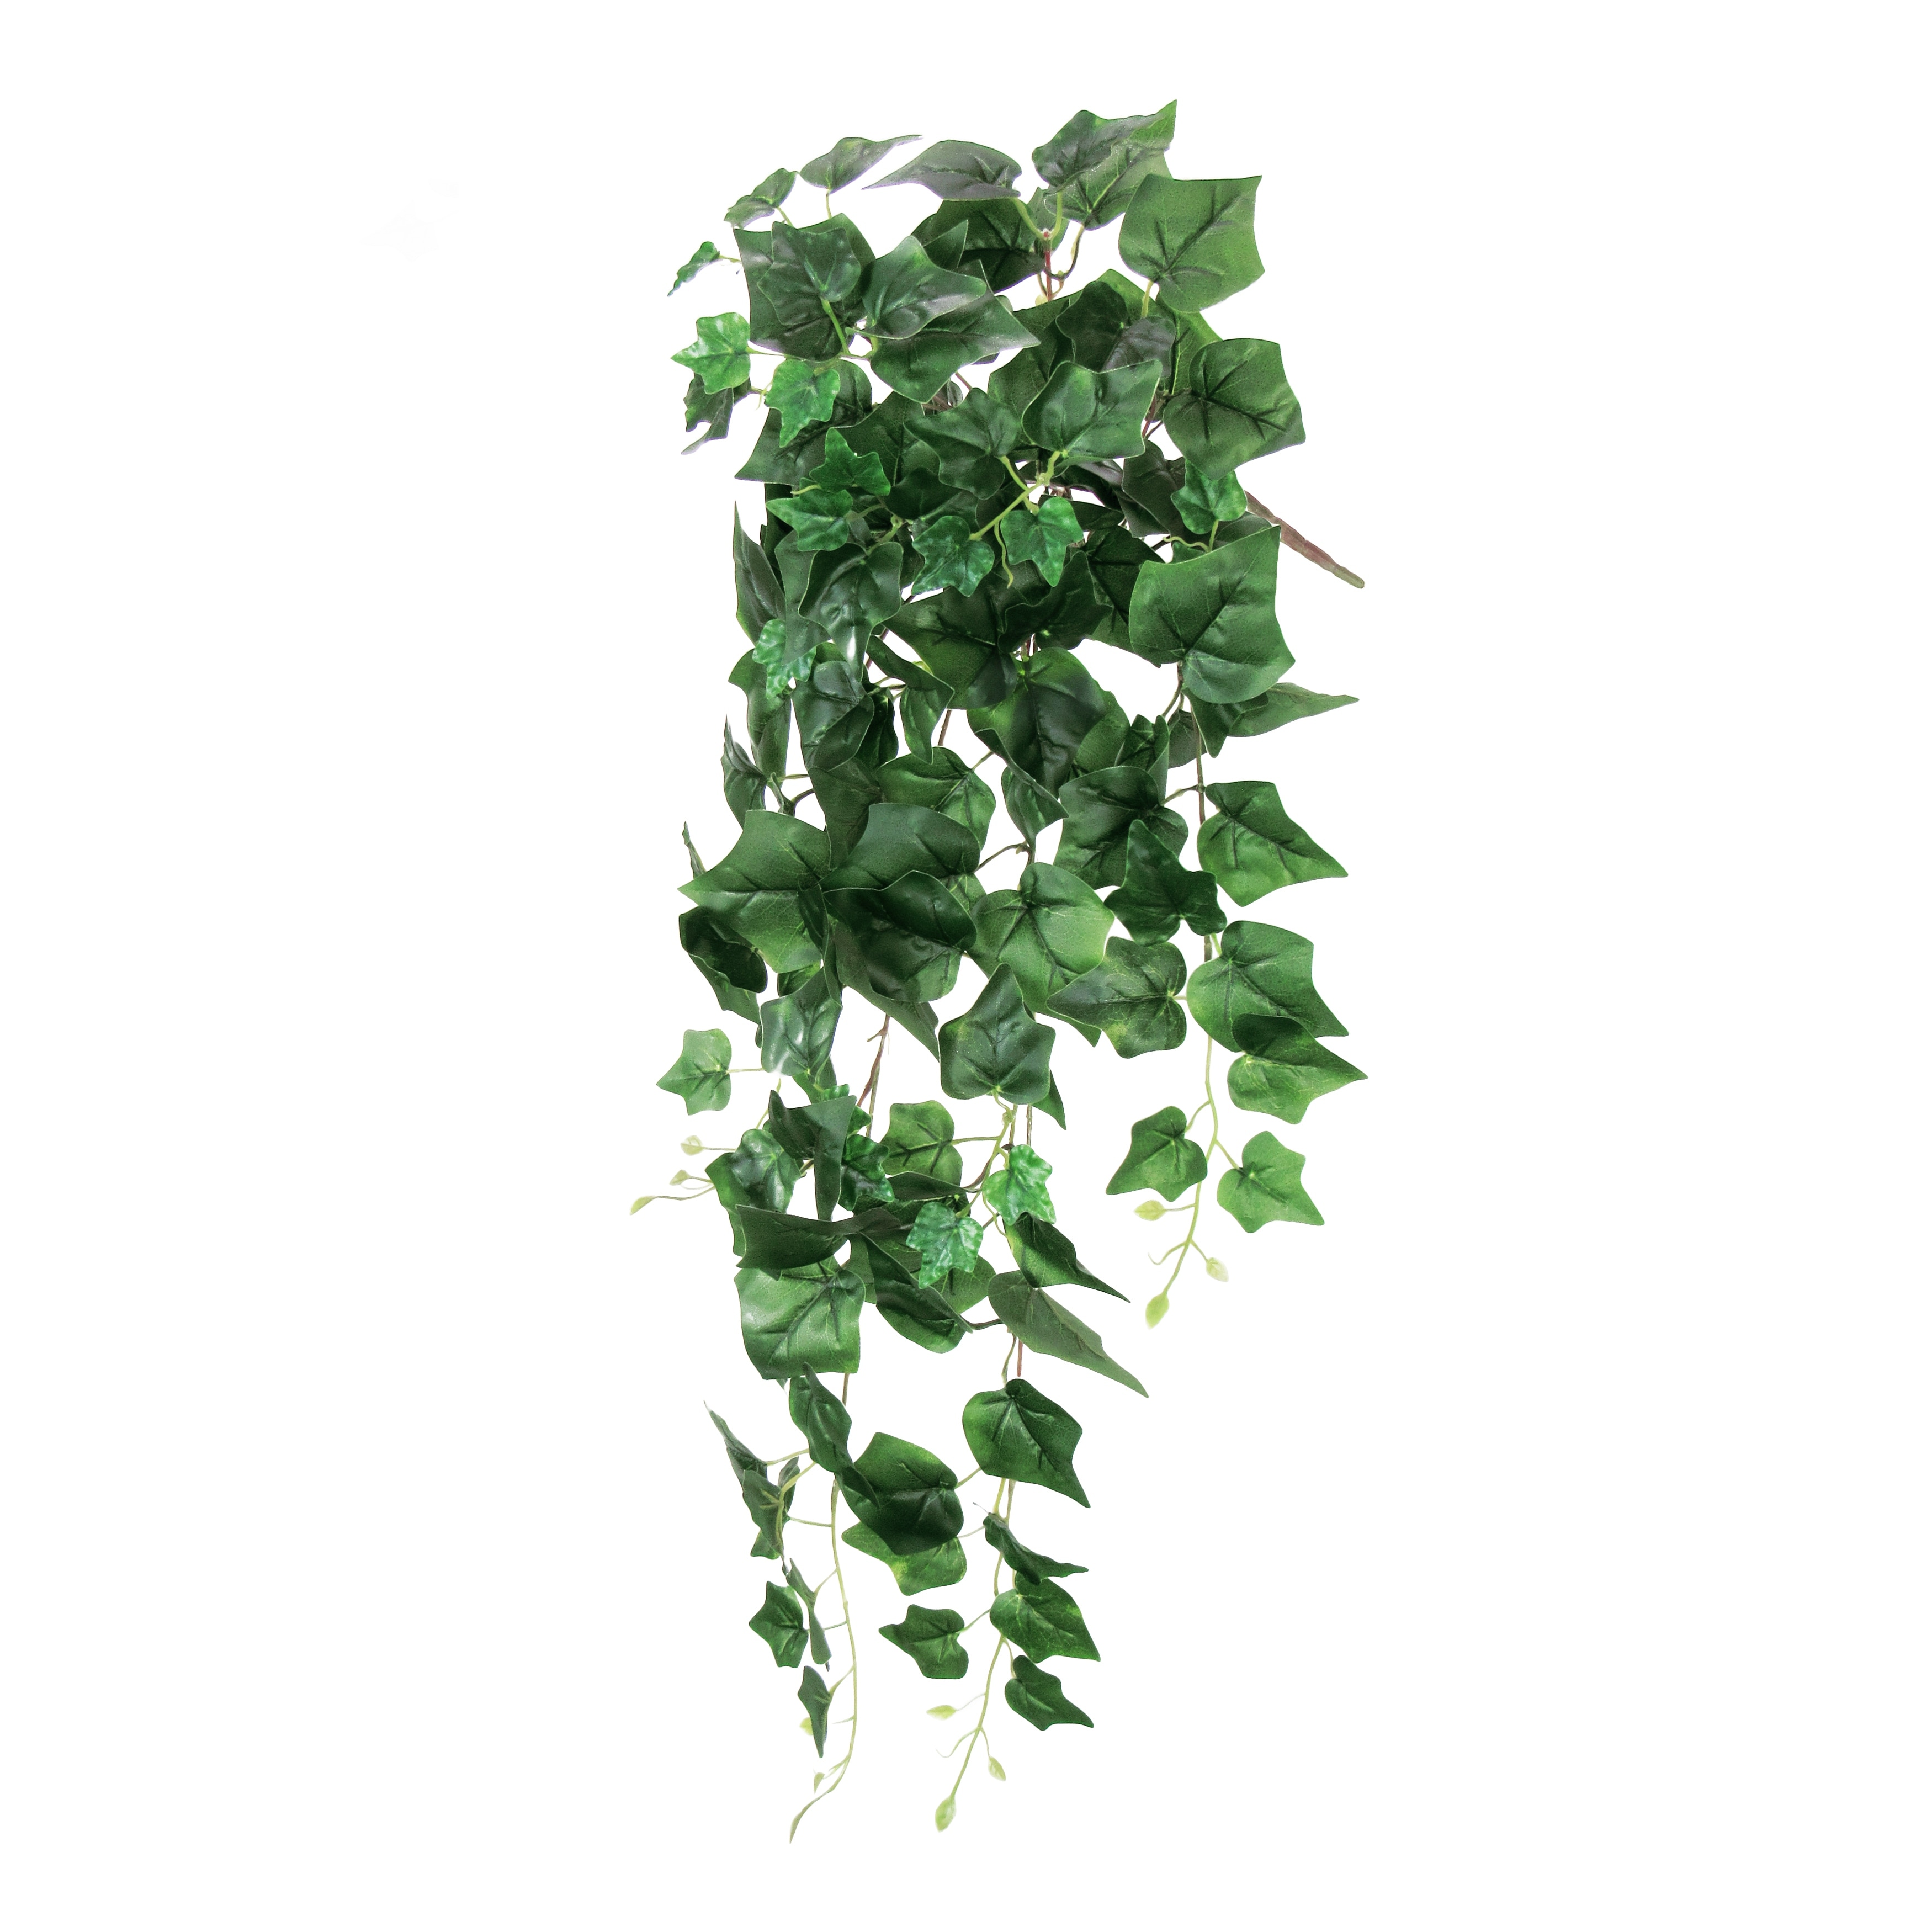 Living Luxury Artificial Variegated English Ivy Leaf Vine Hanging Plant Greenery Foliage Bush 32in - 32 inch L x 12 inch W x 6 inch Dp, Size: 32 Large